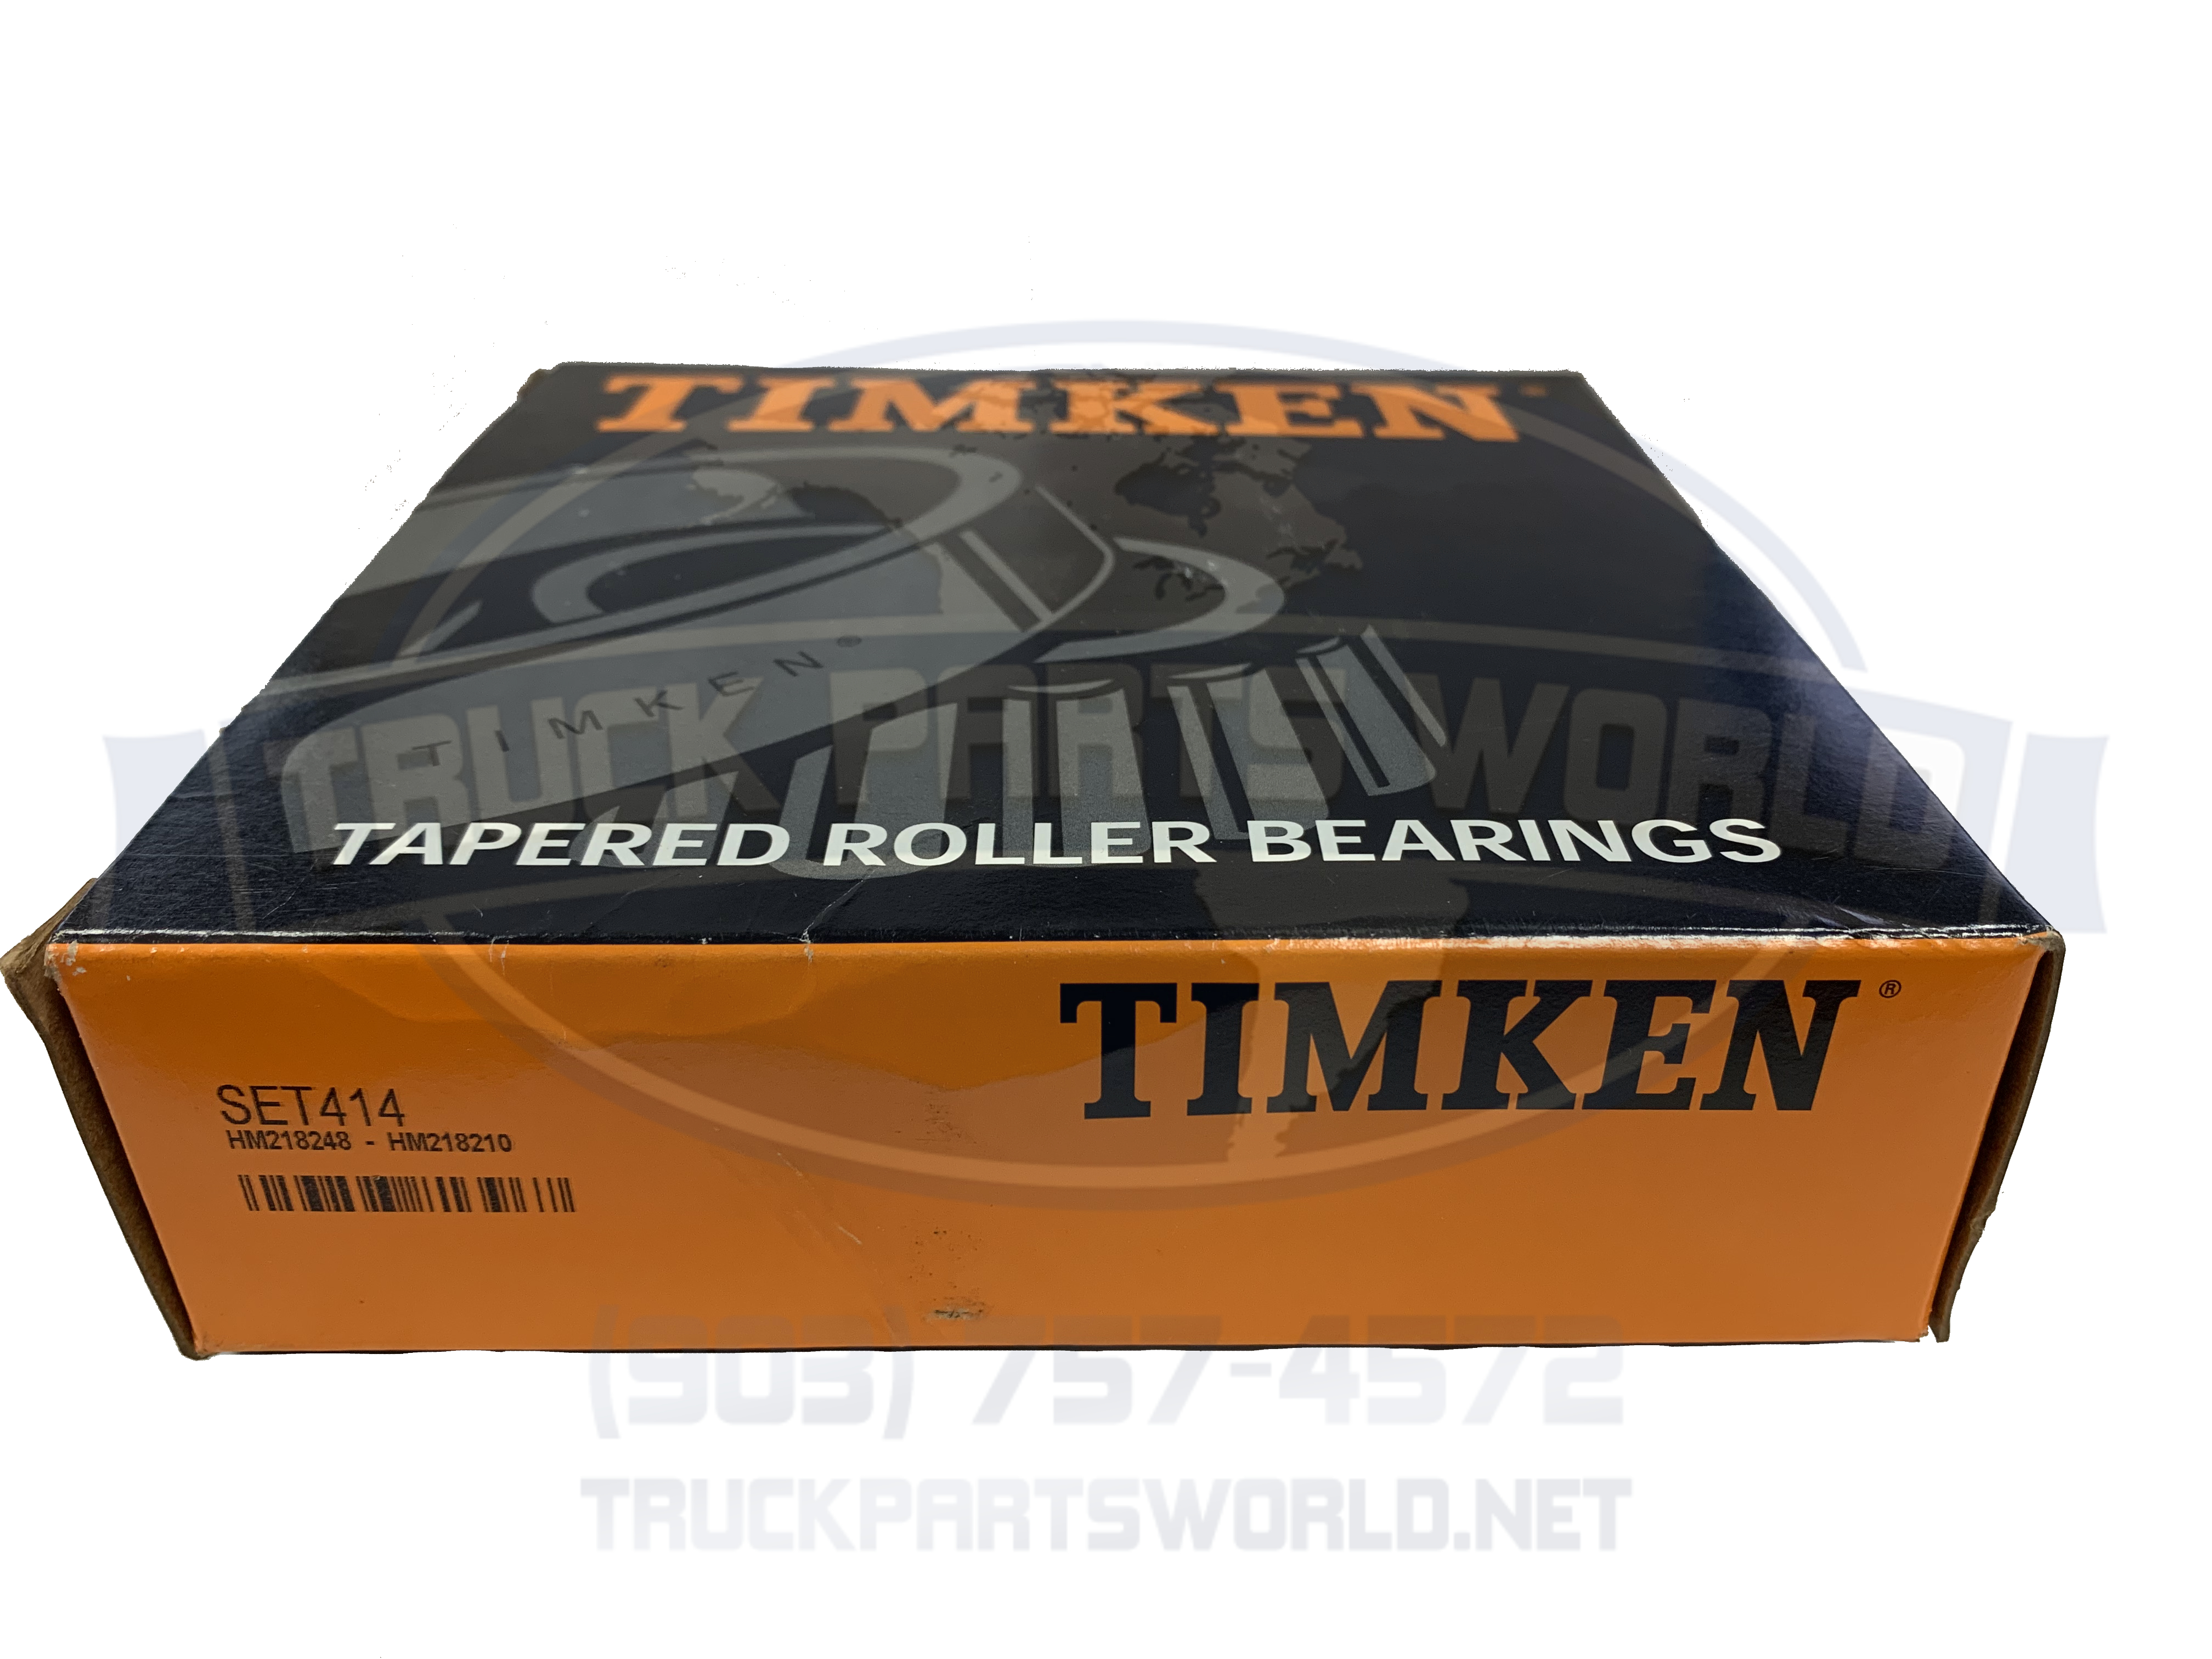 HM218248/HM218210 Tapered Roller Bearing Set 414 3.54" Bore 